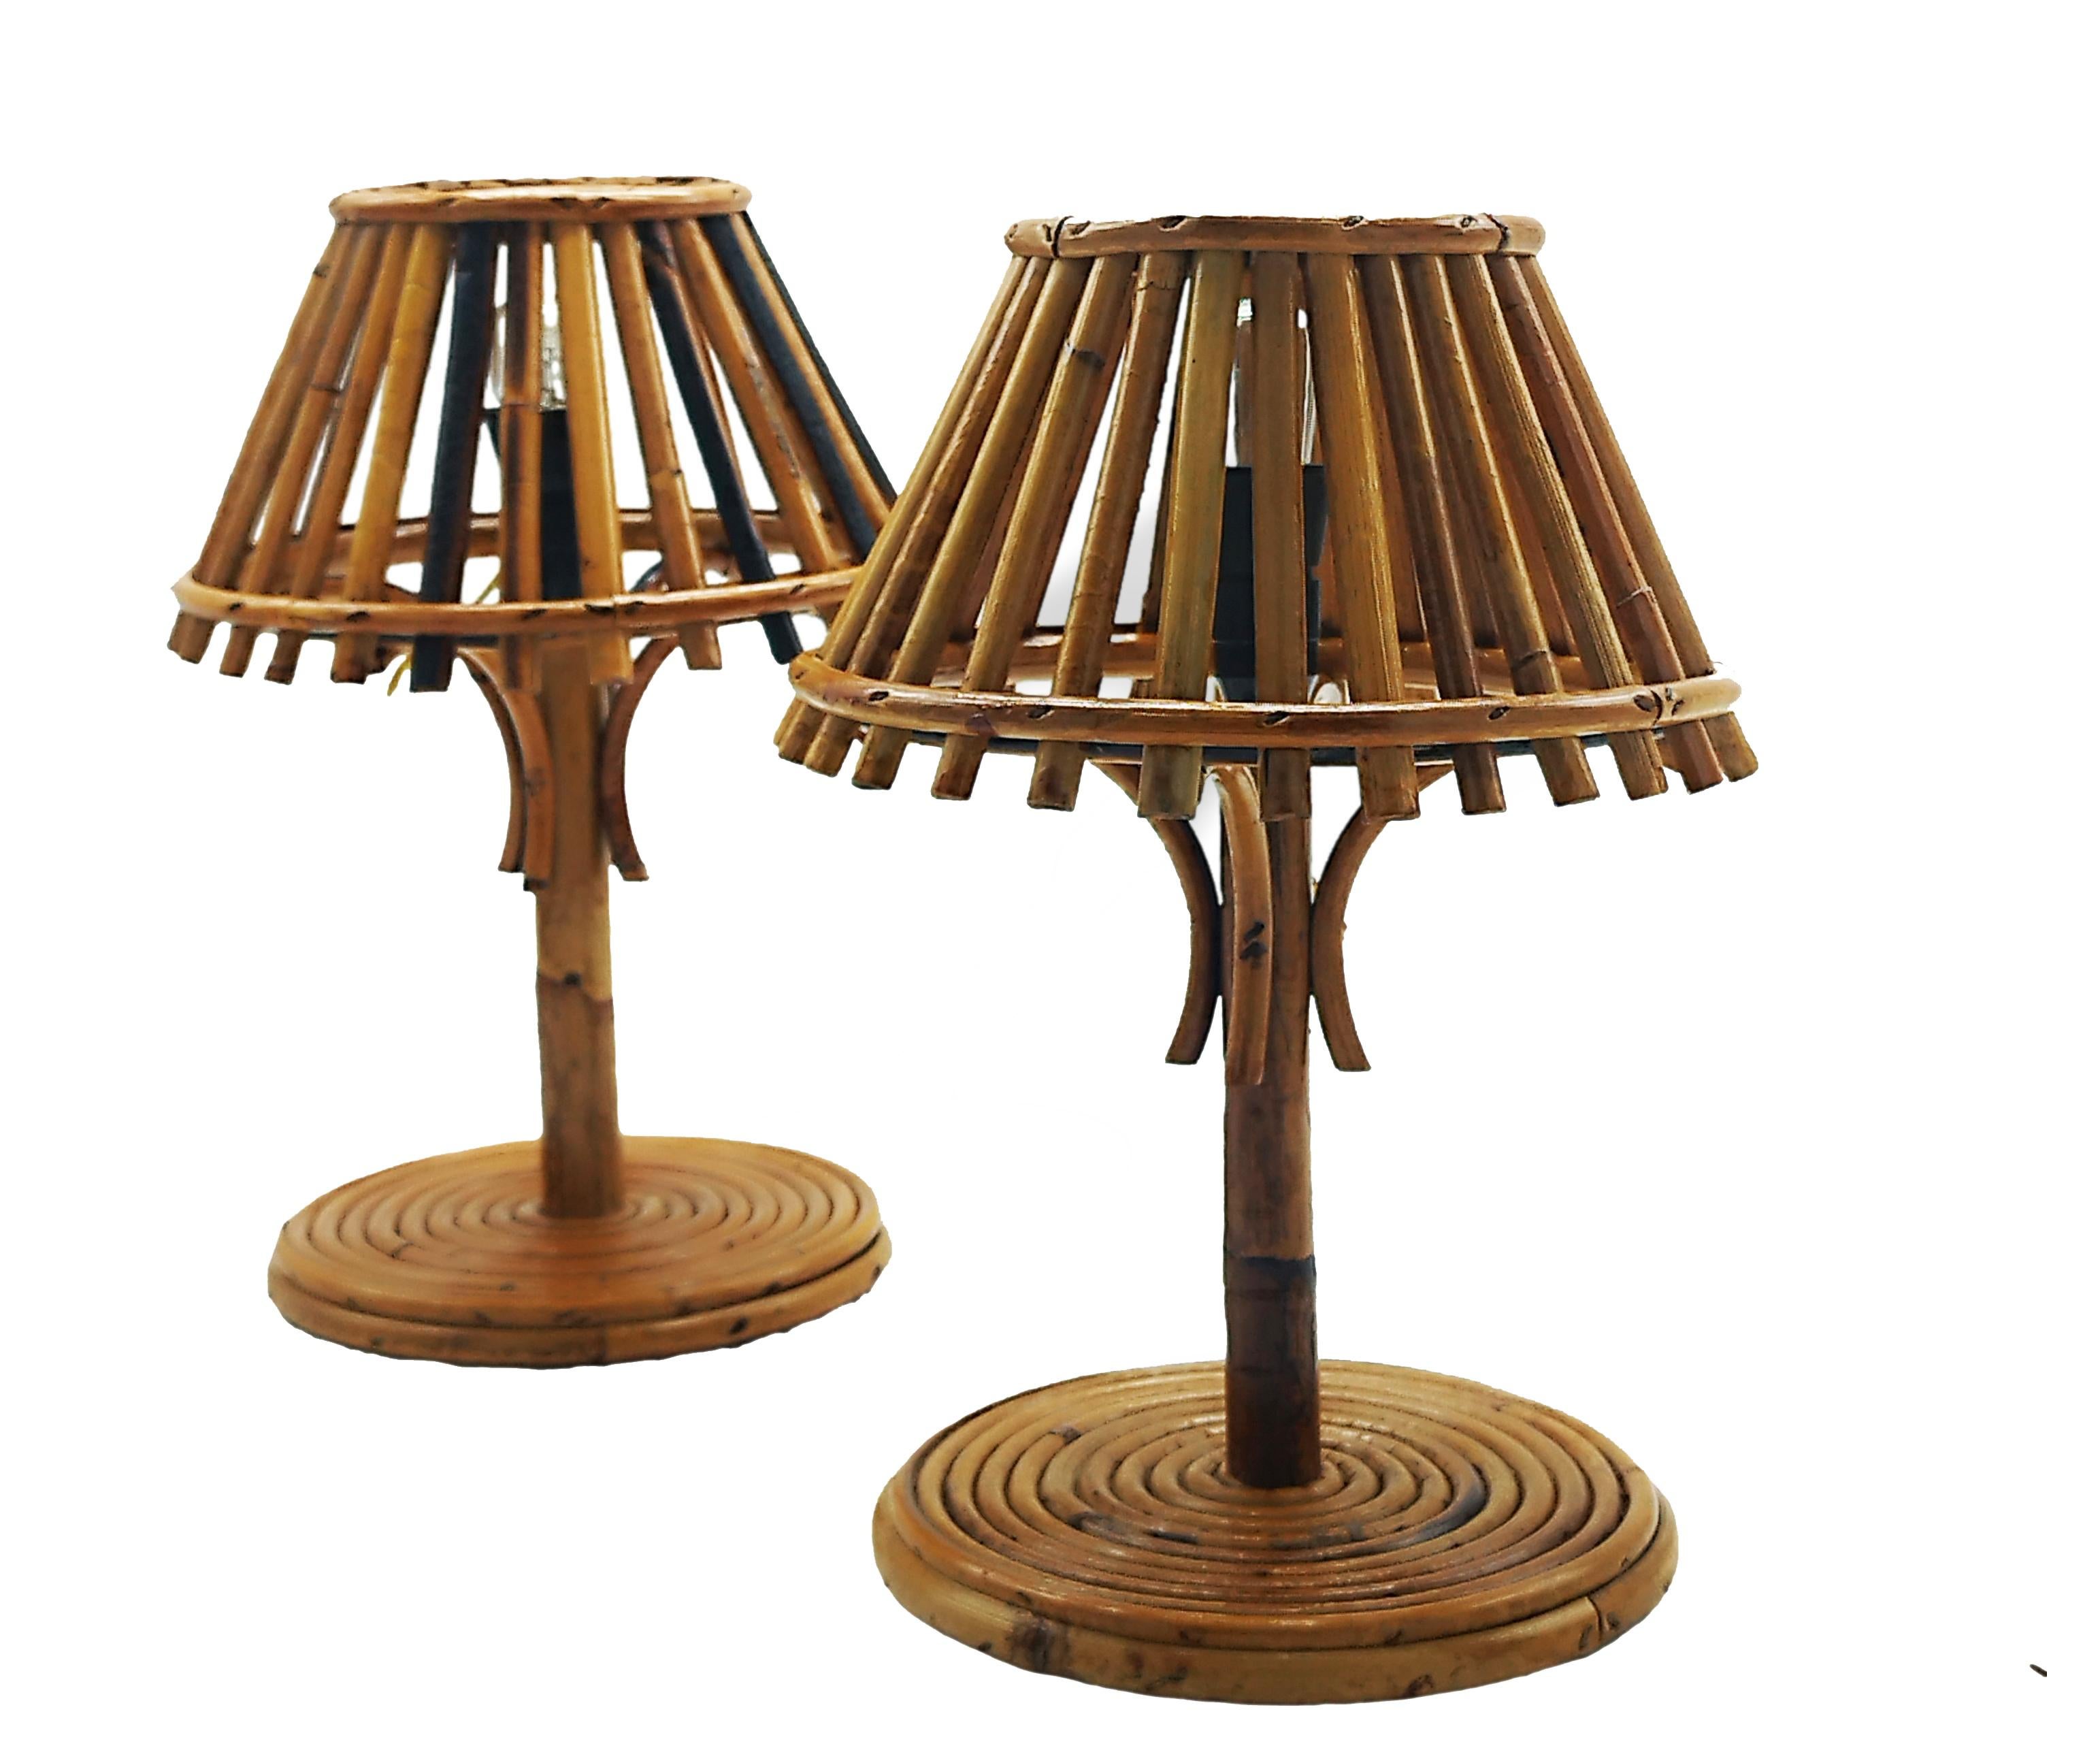 Beautiful pair of bamboo and rattan table lamps in the style of Louis Sognot.
Made in Italy in the 1960s.